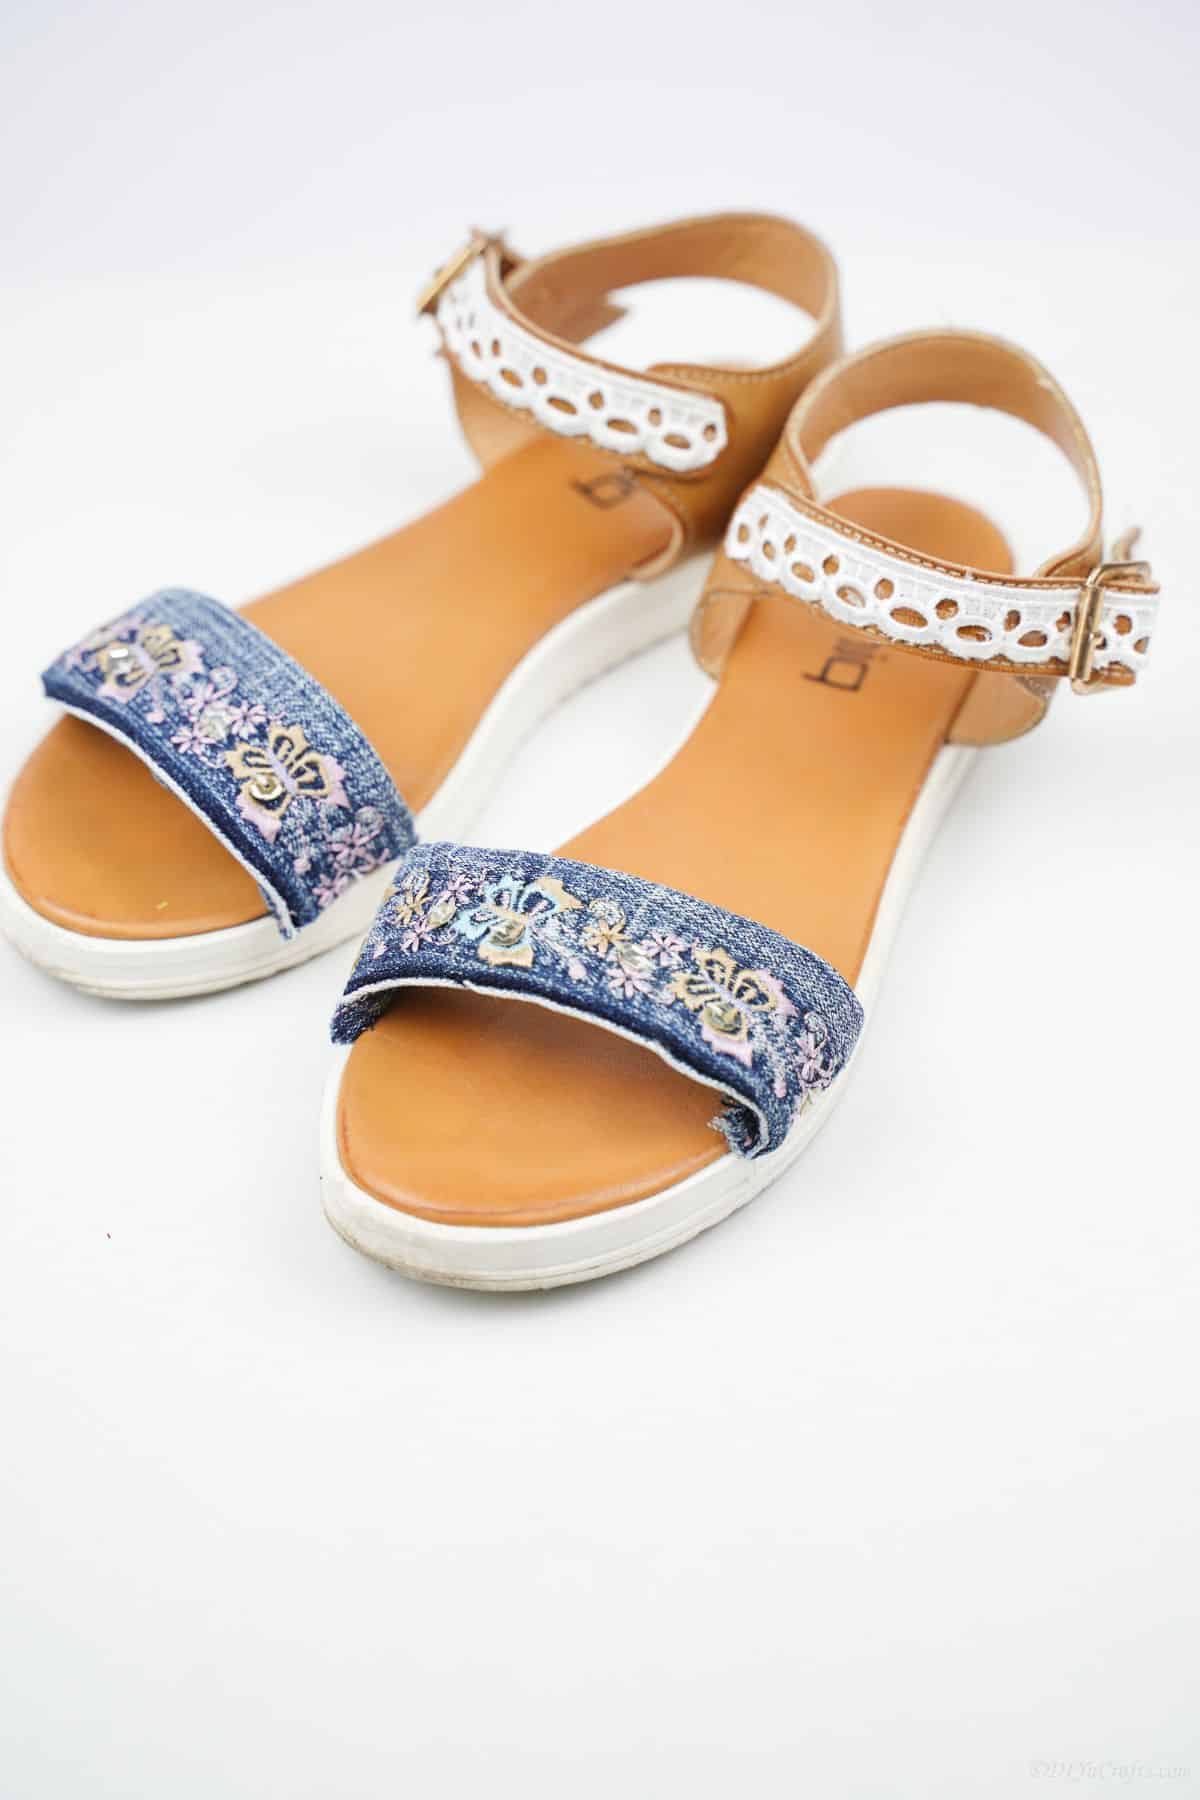 brown sandals with denim and lace straps on white table